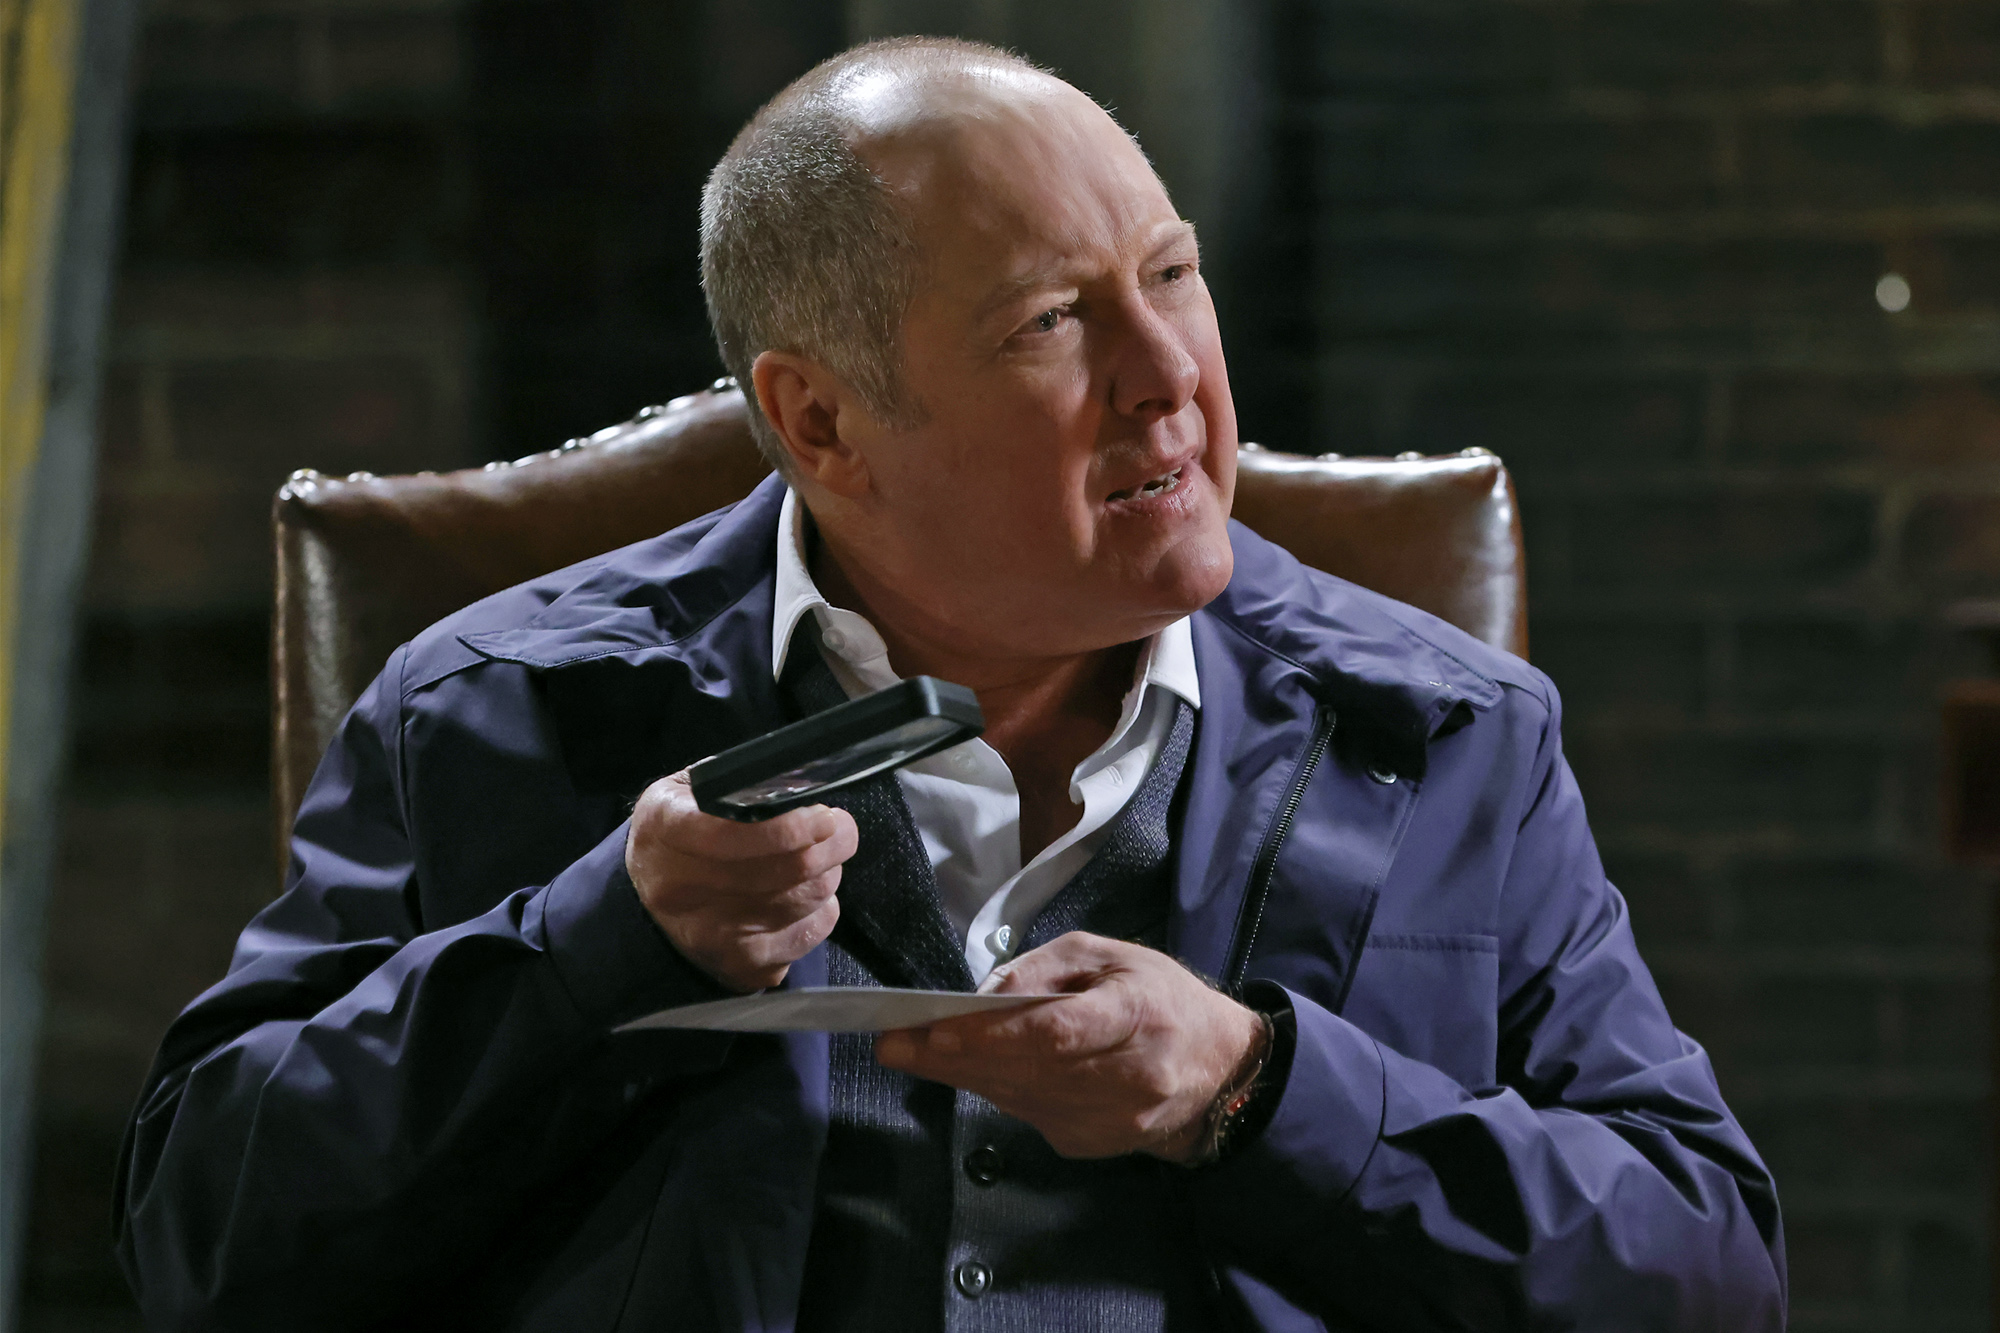 THE BLACKLIST -- "Blair Foster (#39)" Episode 1016 -- Pictured: James Spader as Raymond "Red" Reddington -- (Photo by: Will Hart/NBC)